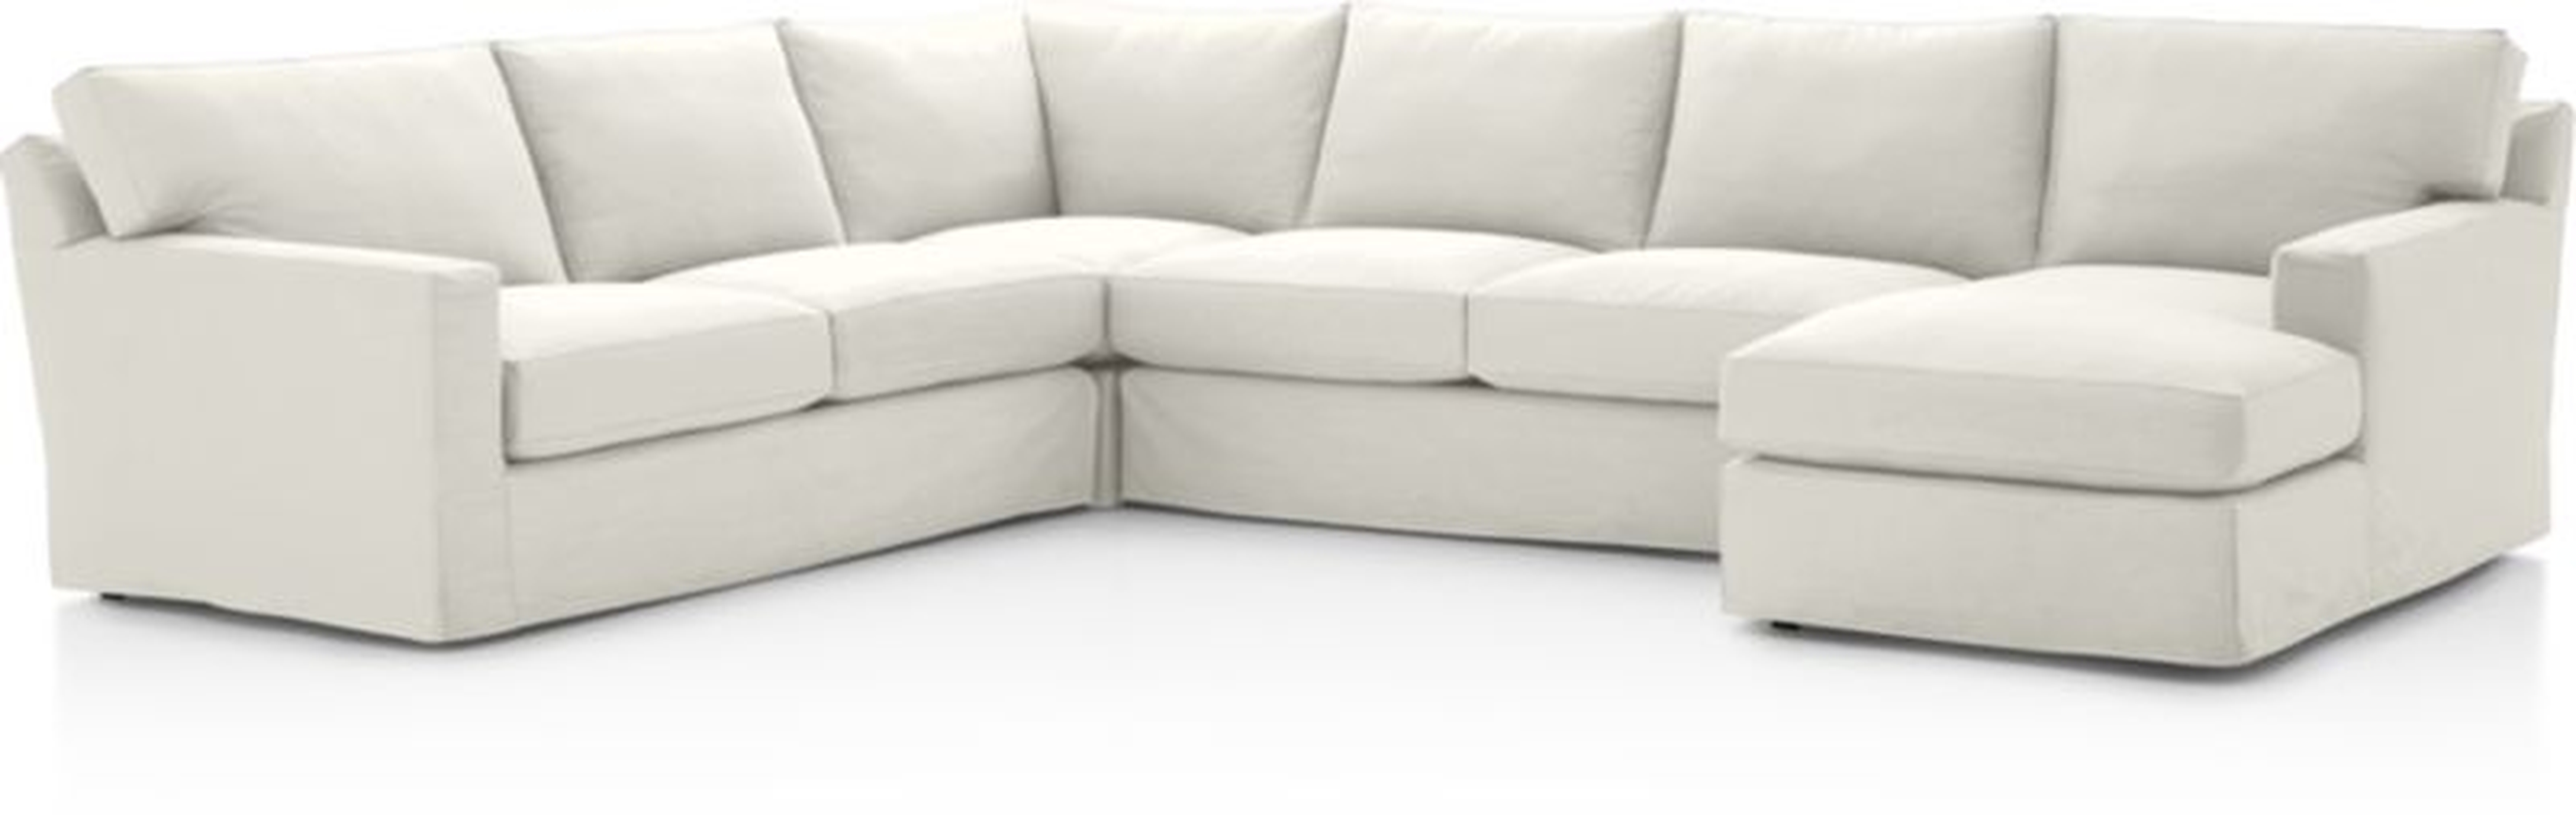 Axis II Slipcovered 4-Piece Sectional Sofa - Crate and Barrel